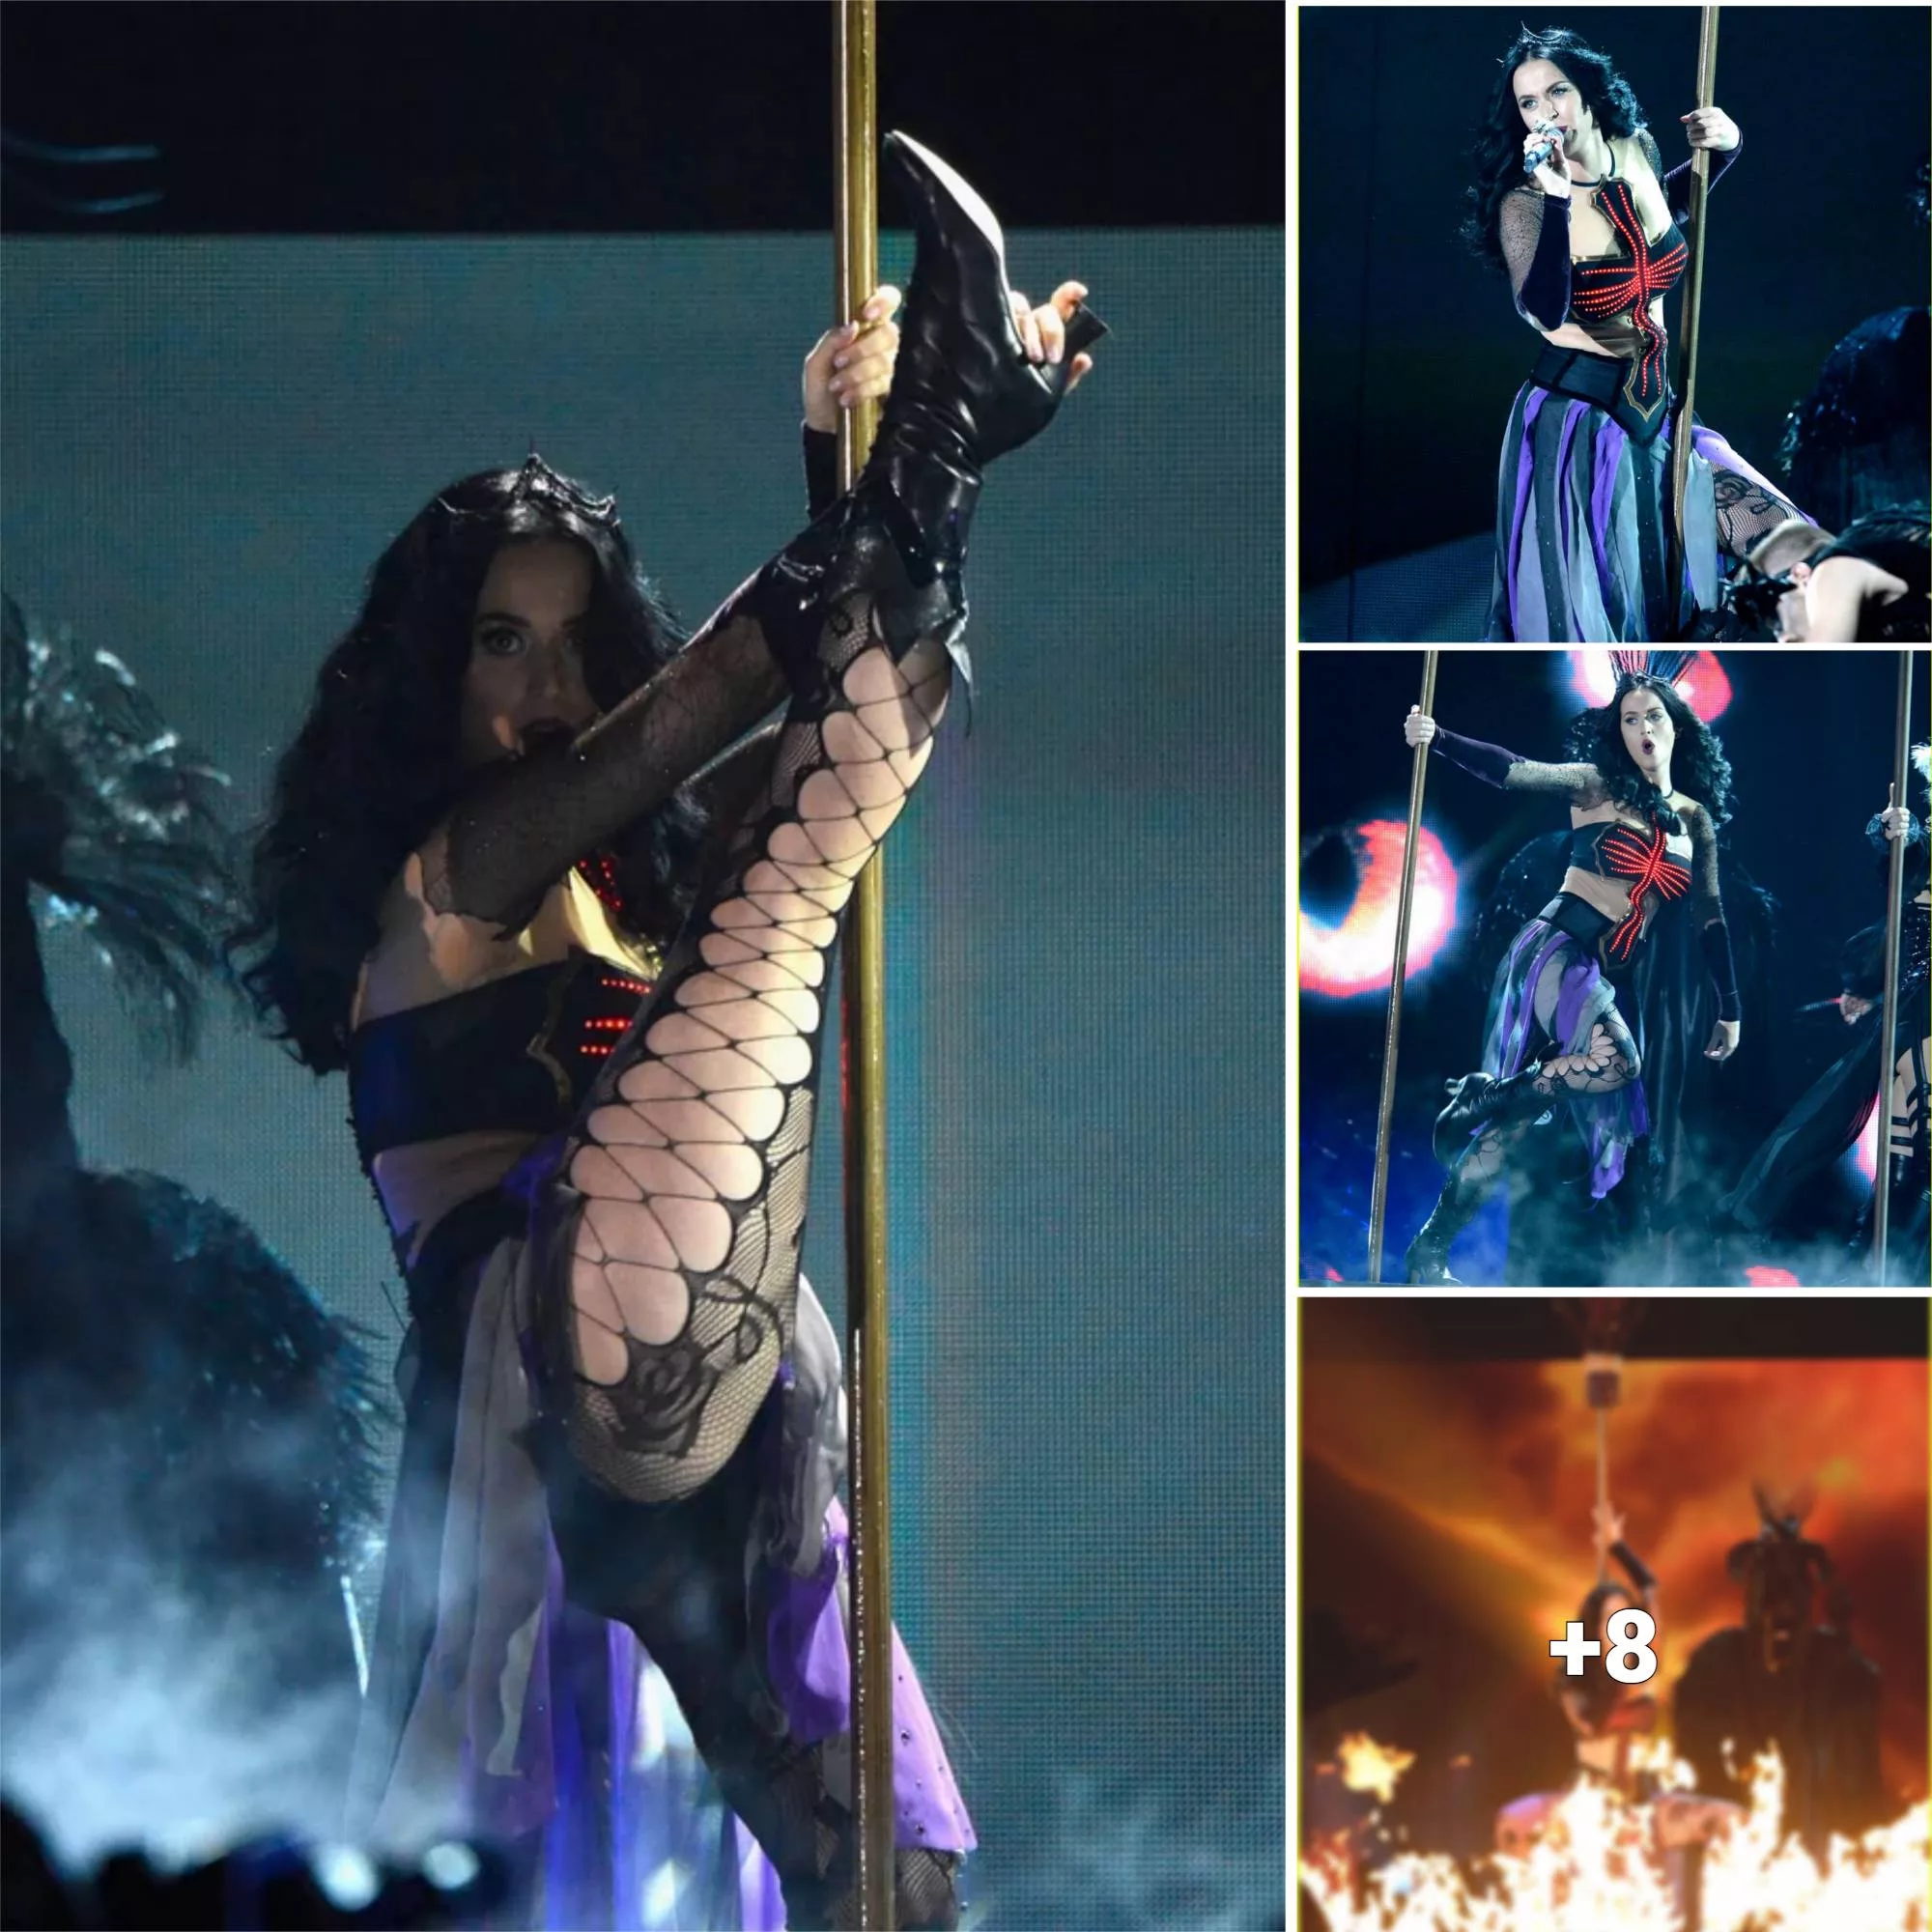 Katy Perrys Grammy Performance A Spellbinding Showcase Of Music And Dance 3047